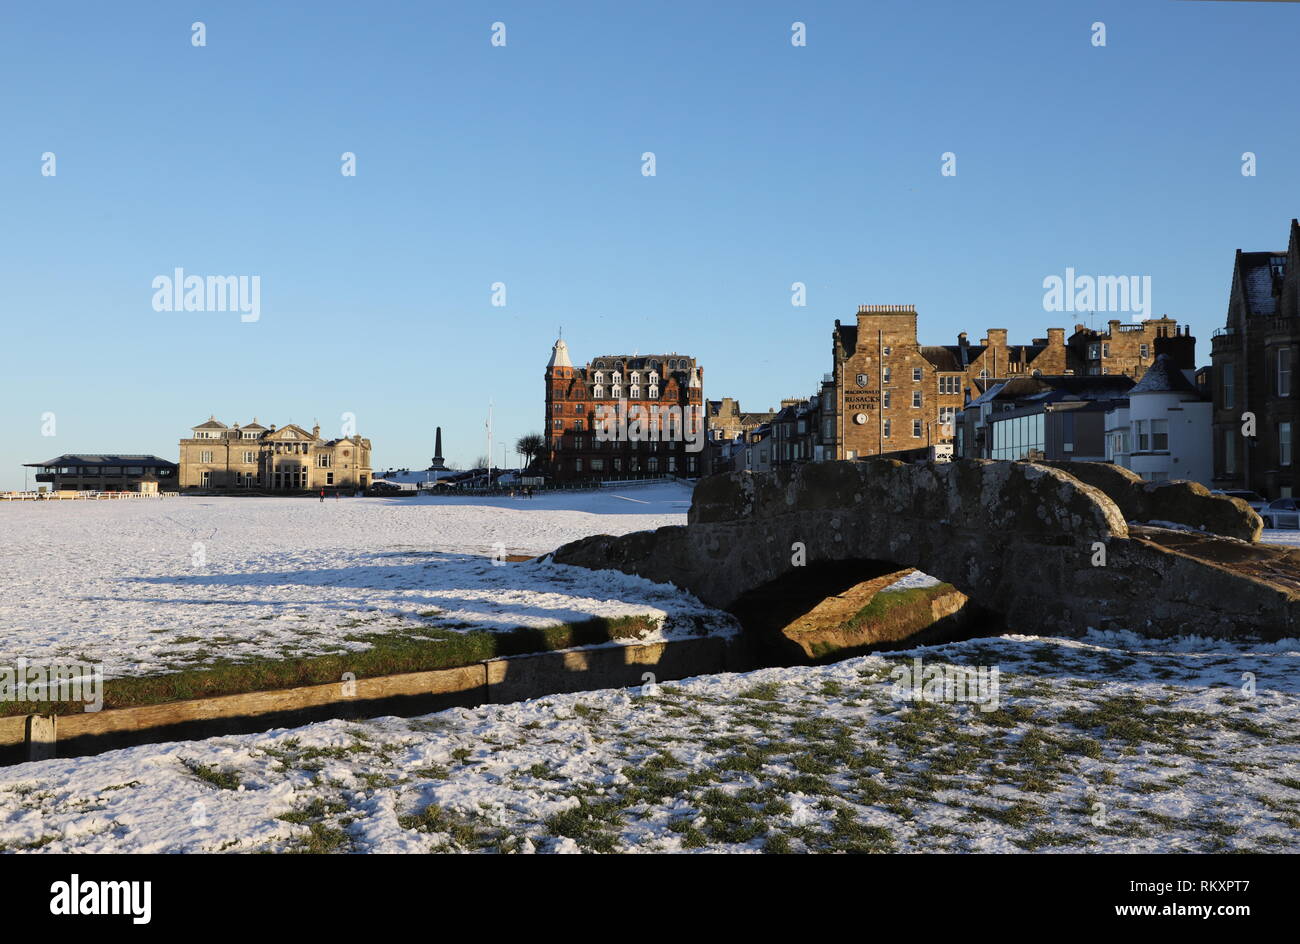 Swilken Bridge and Royal and Ancient Clubhouse with snow St Andrews Fife Scotland   February 2019 Stock Photo